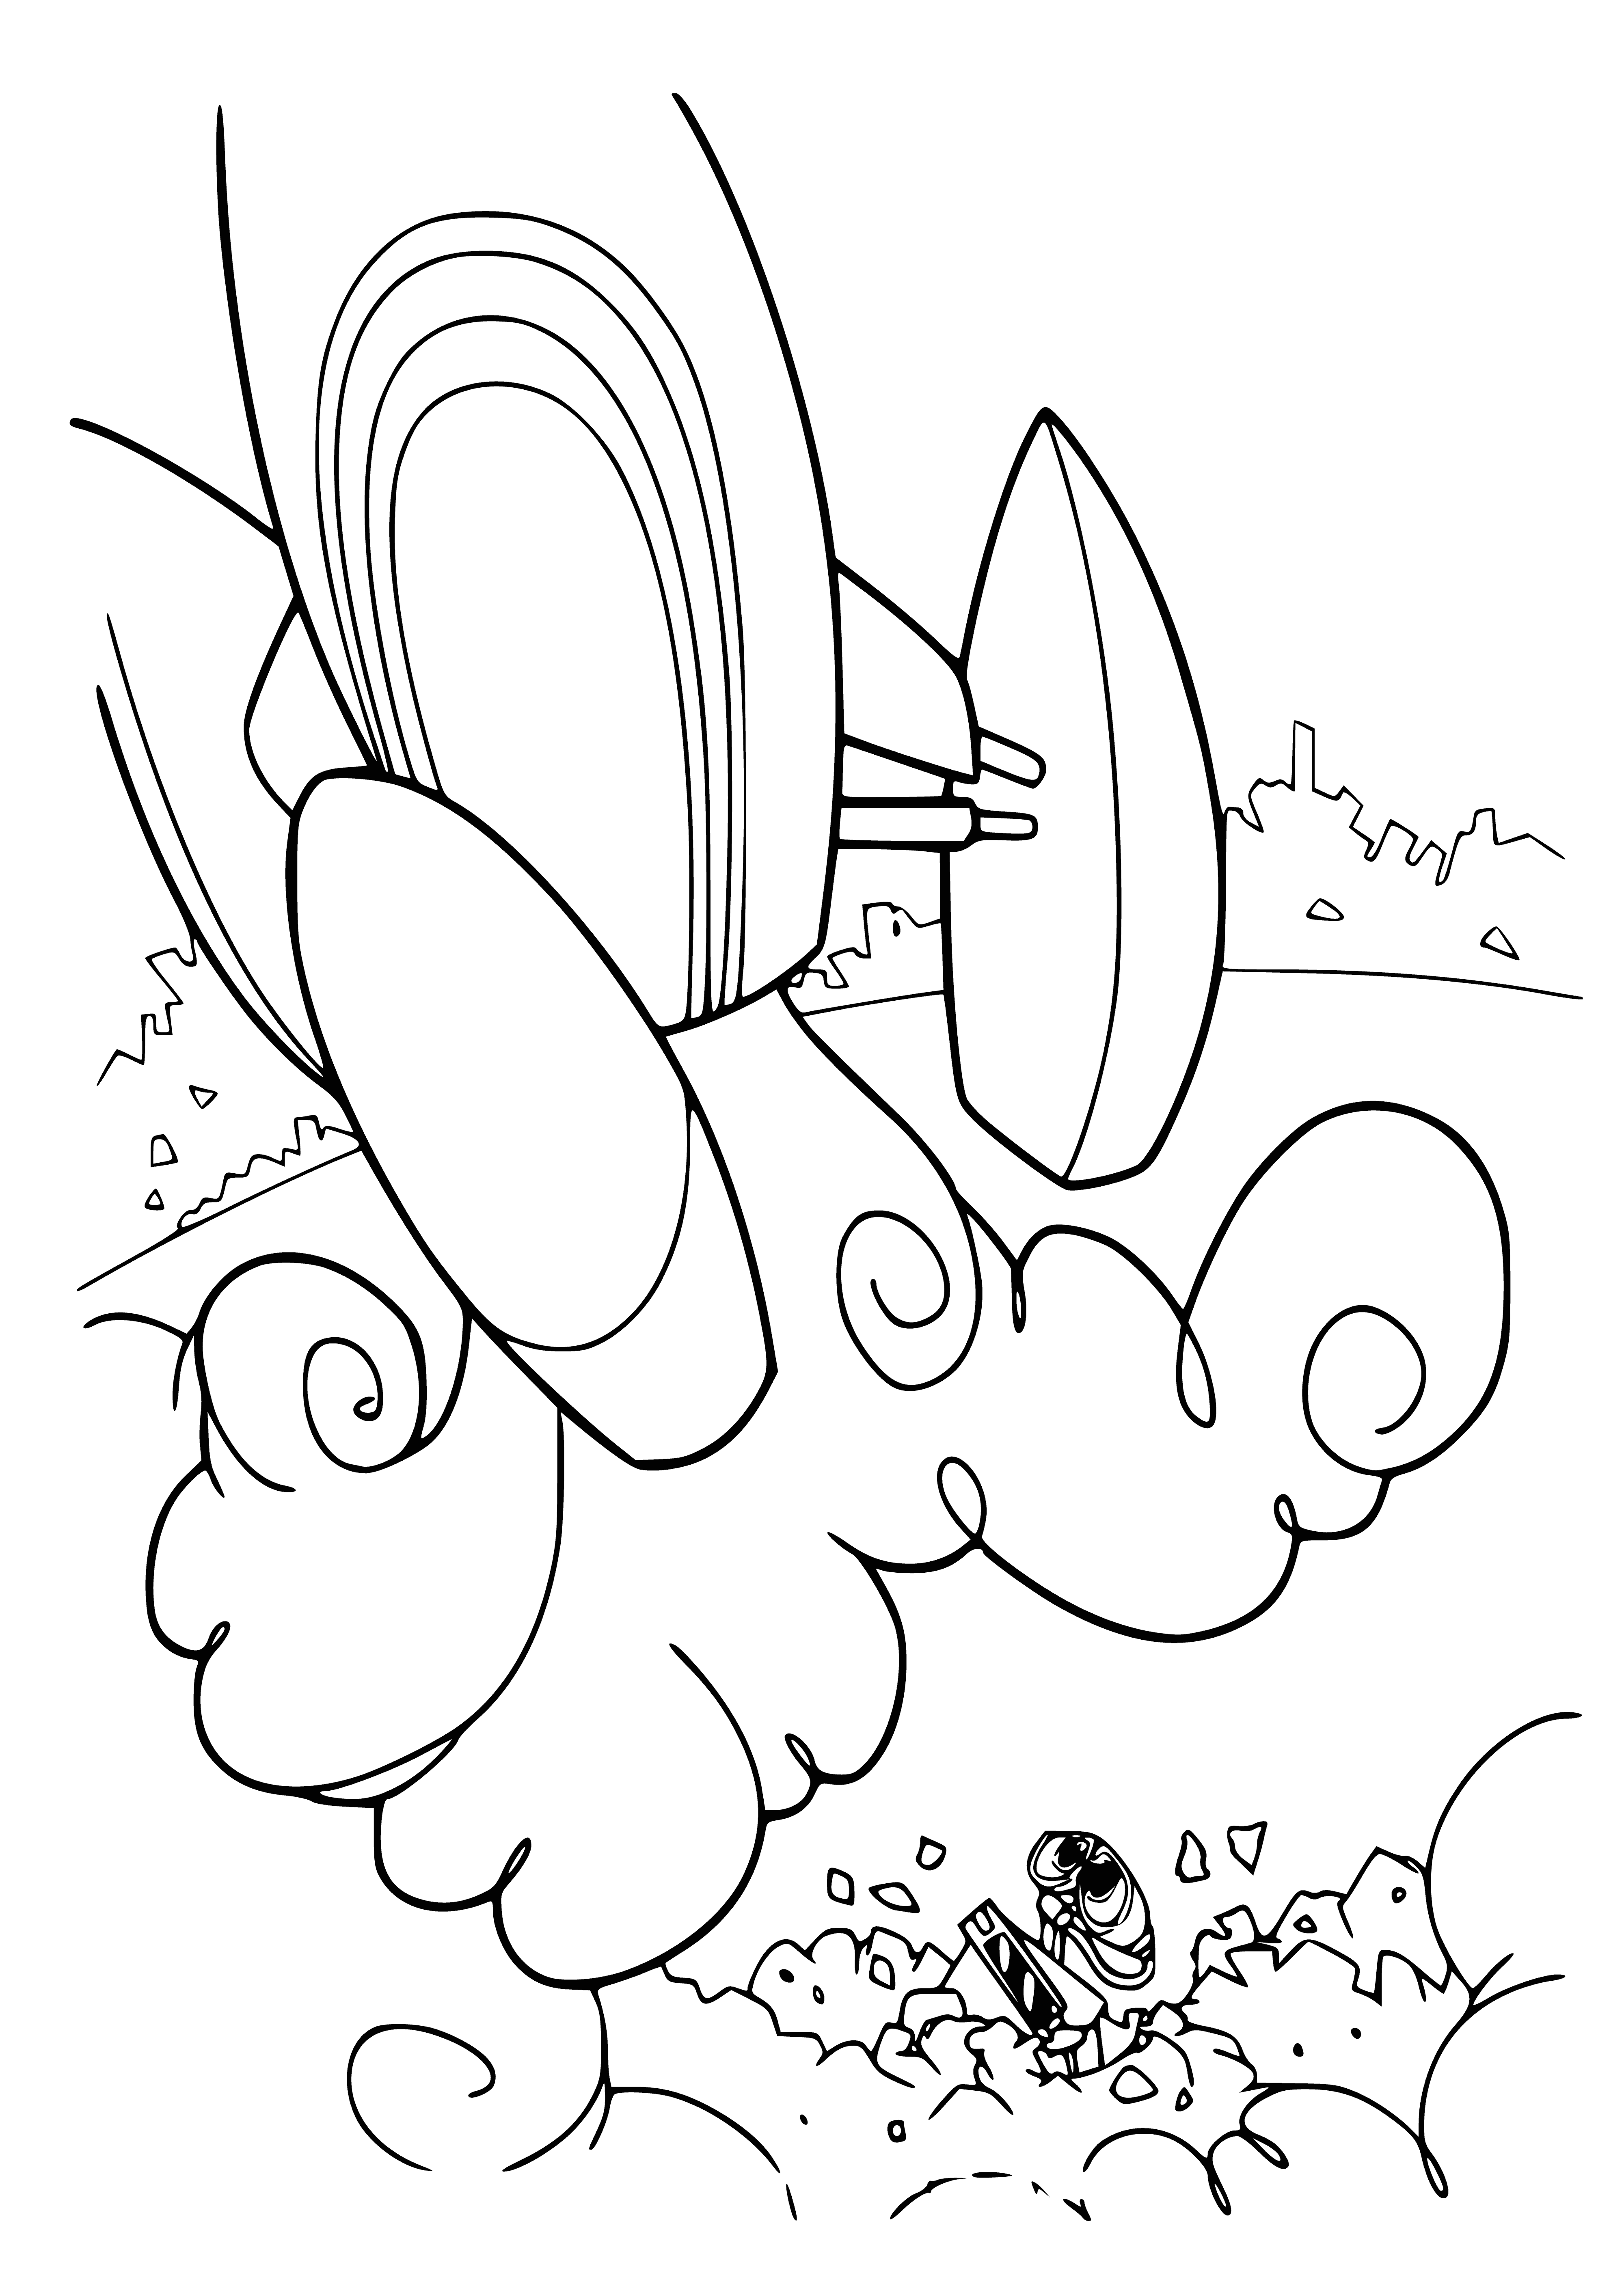 The ship imports Eve coloring page